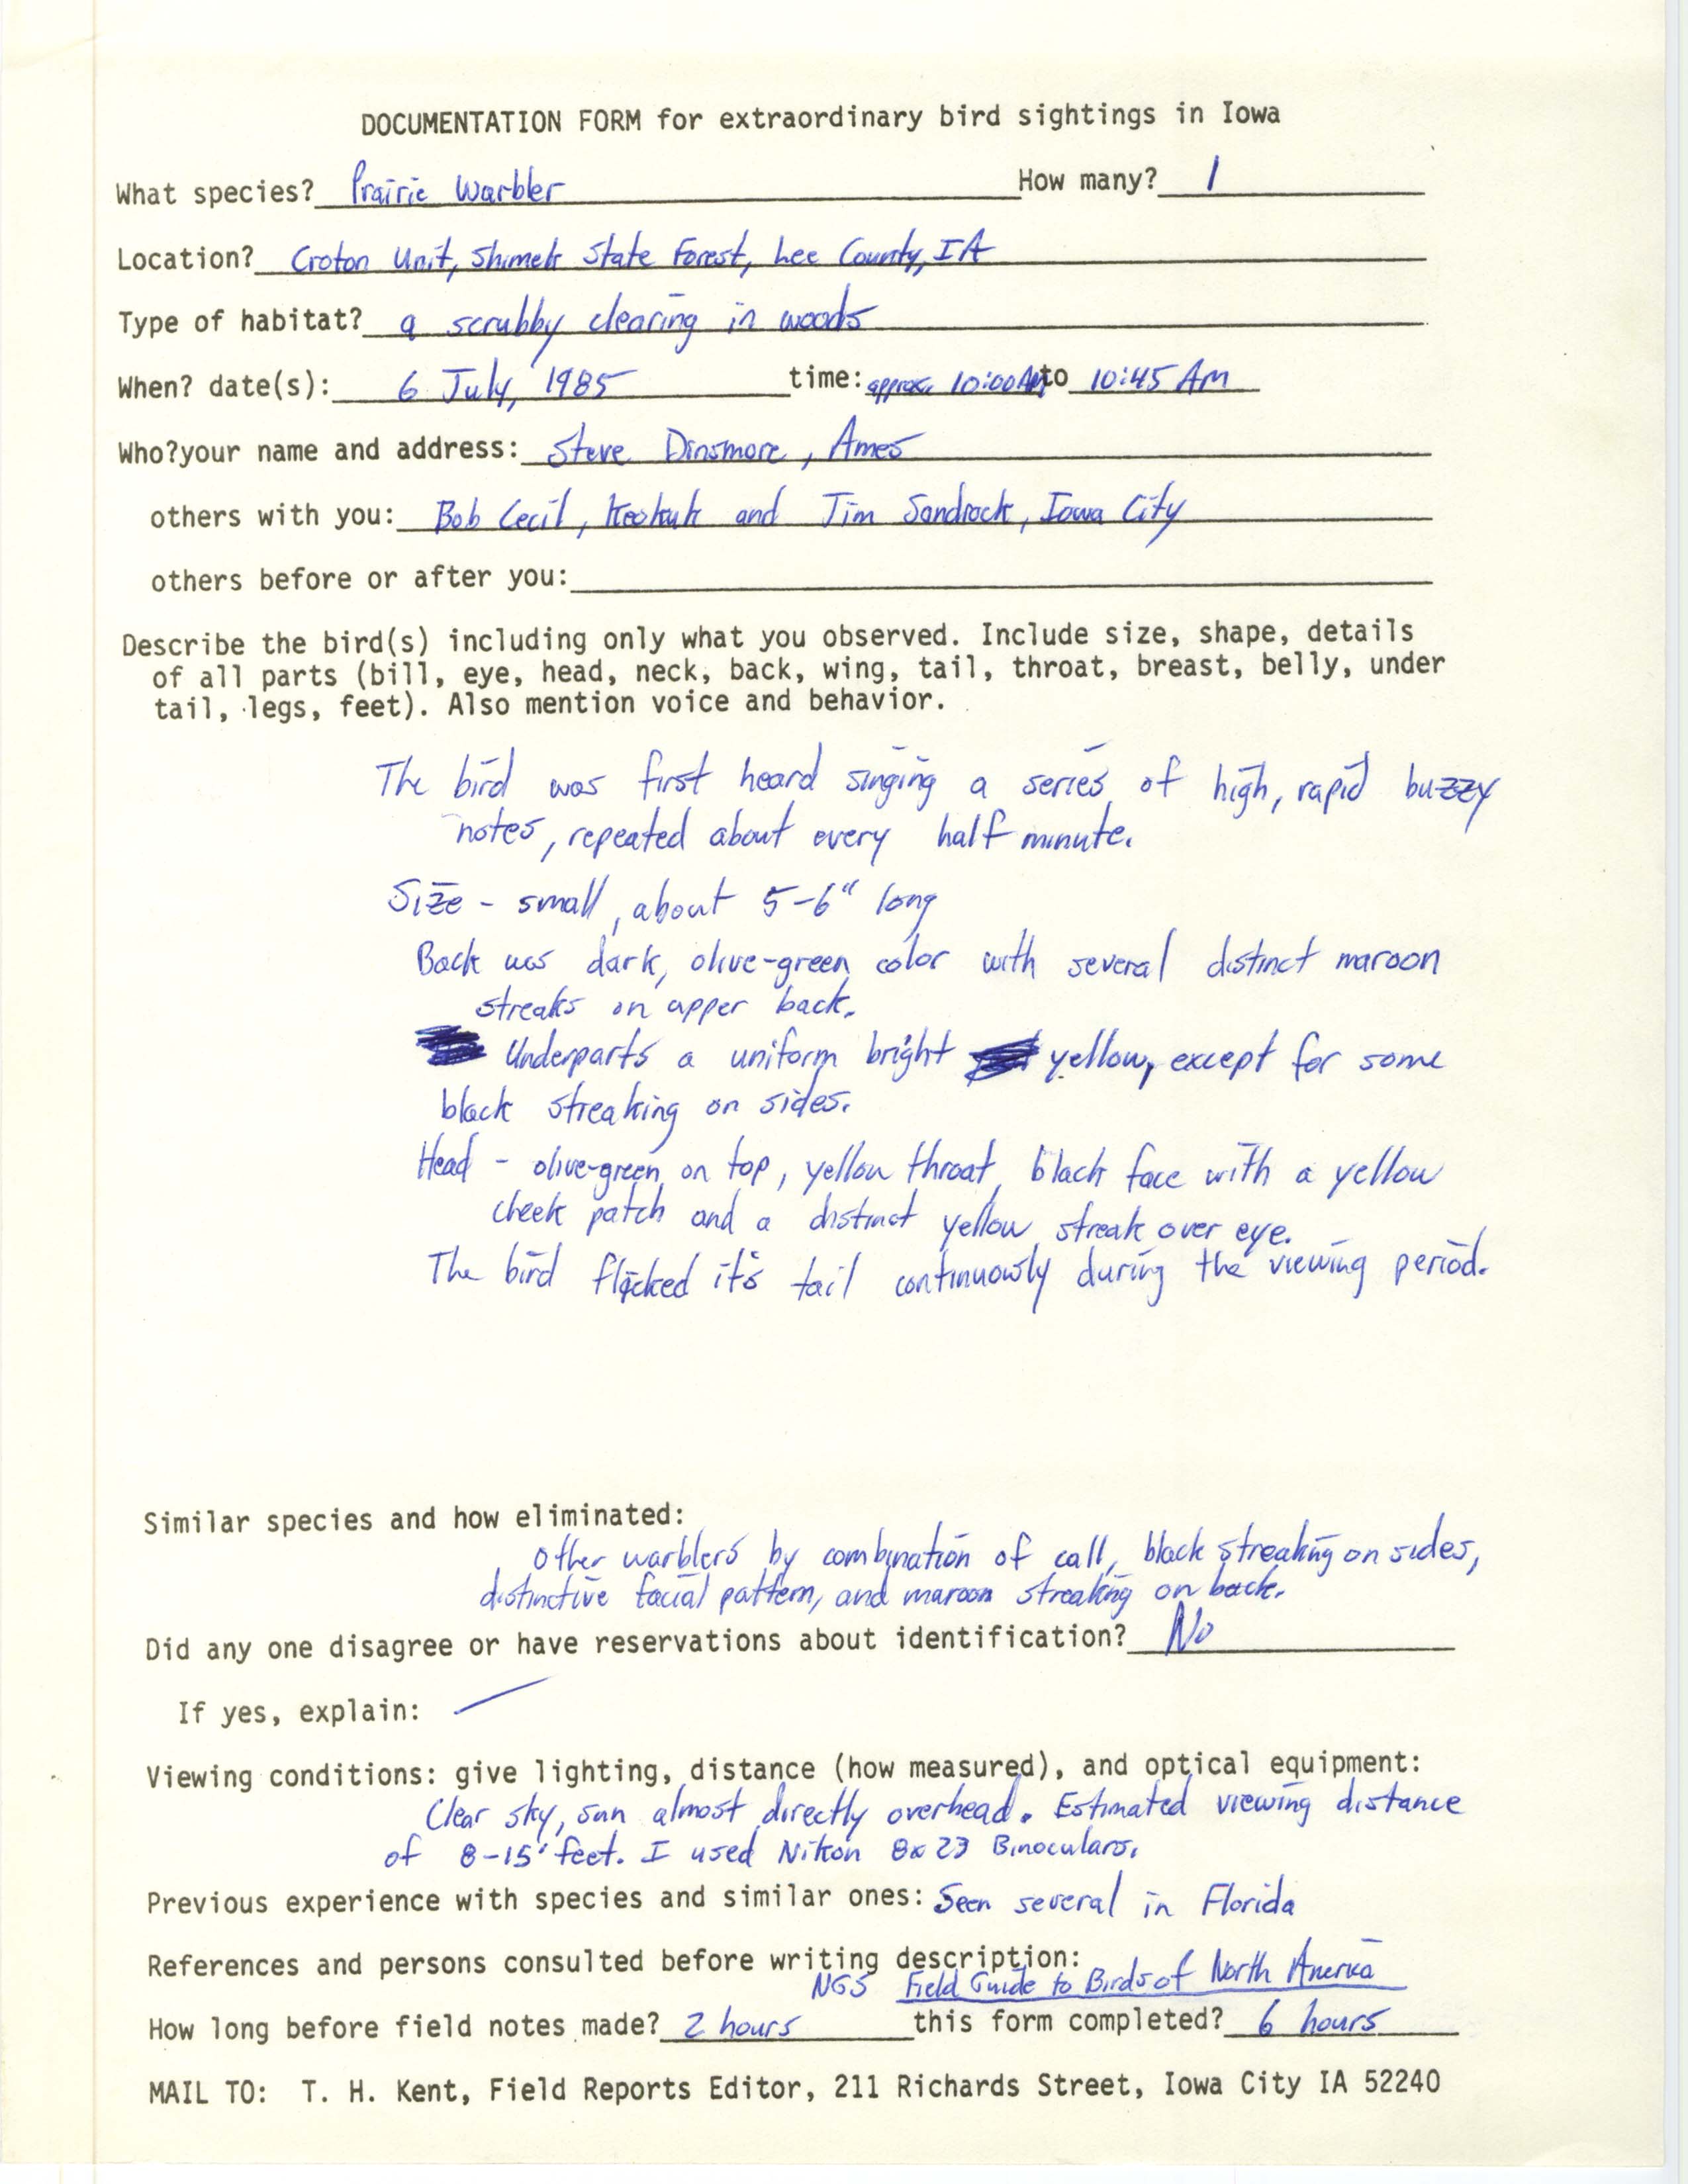 Rare bird documentation form for Prairie Warbler at the Croton Unit in Shimek State Forest, 1985